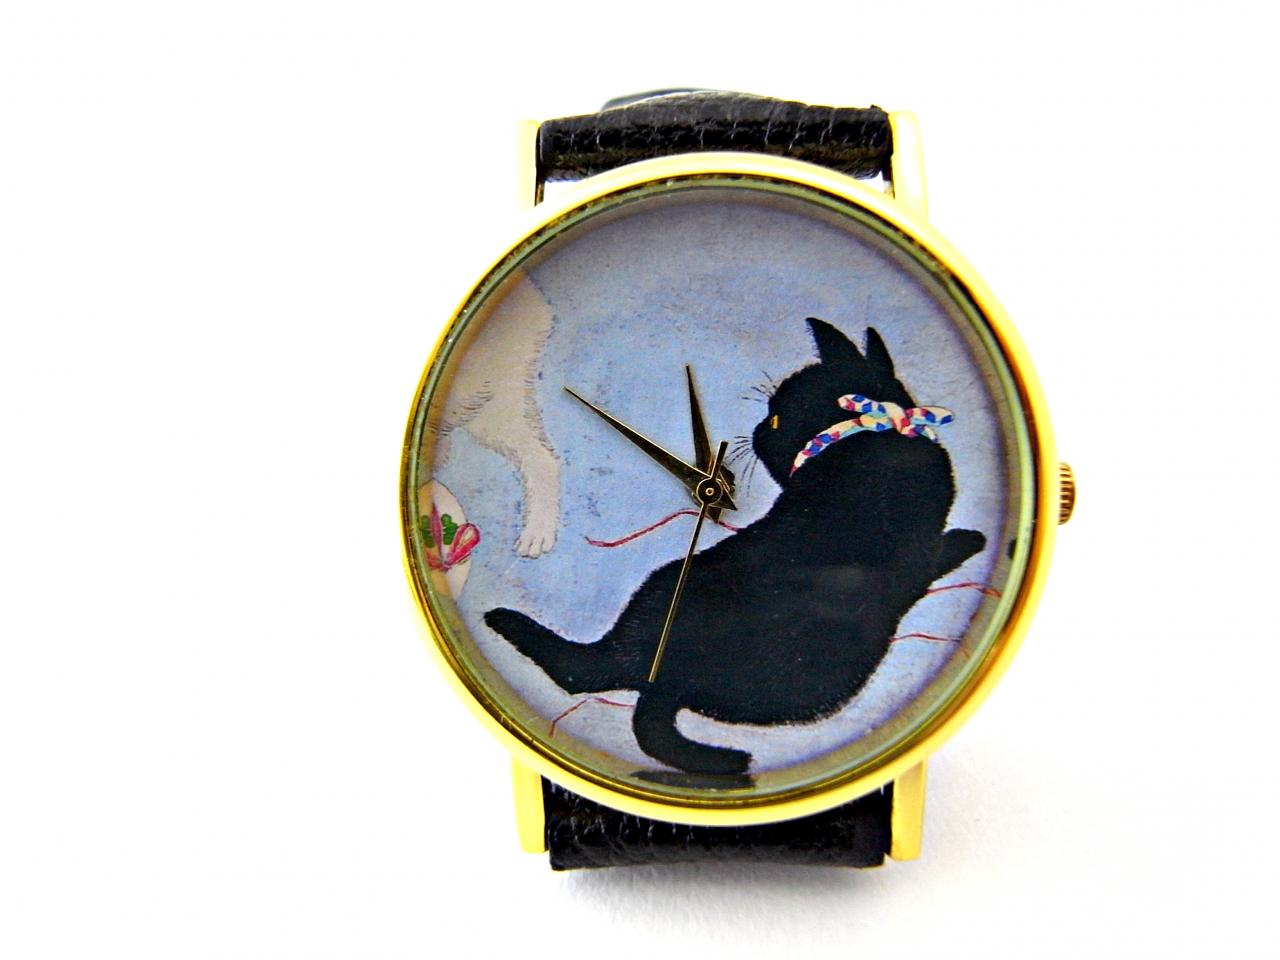 Cat Leather Wrist Watches, Woman Man Lady Unisex Watch, Genuine Leather Handmade Unique Watch #63